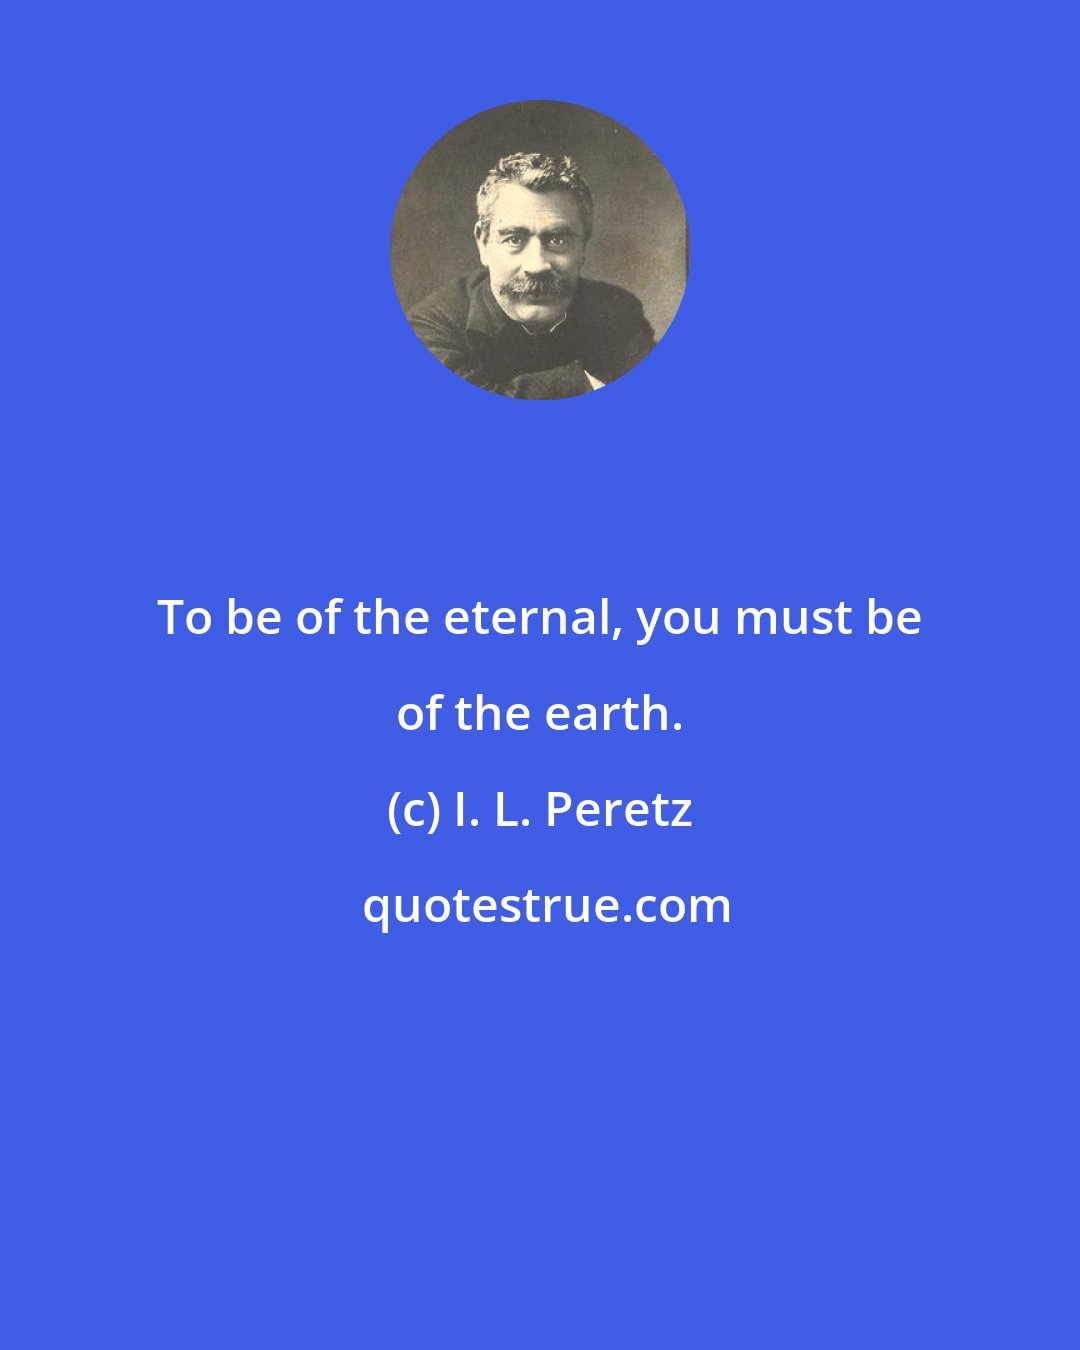 I. L. Peretz: To be of the eternal, you must be of the earth.